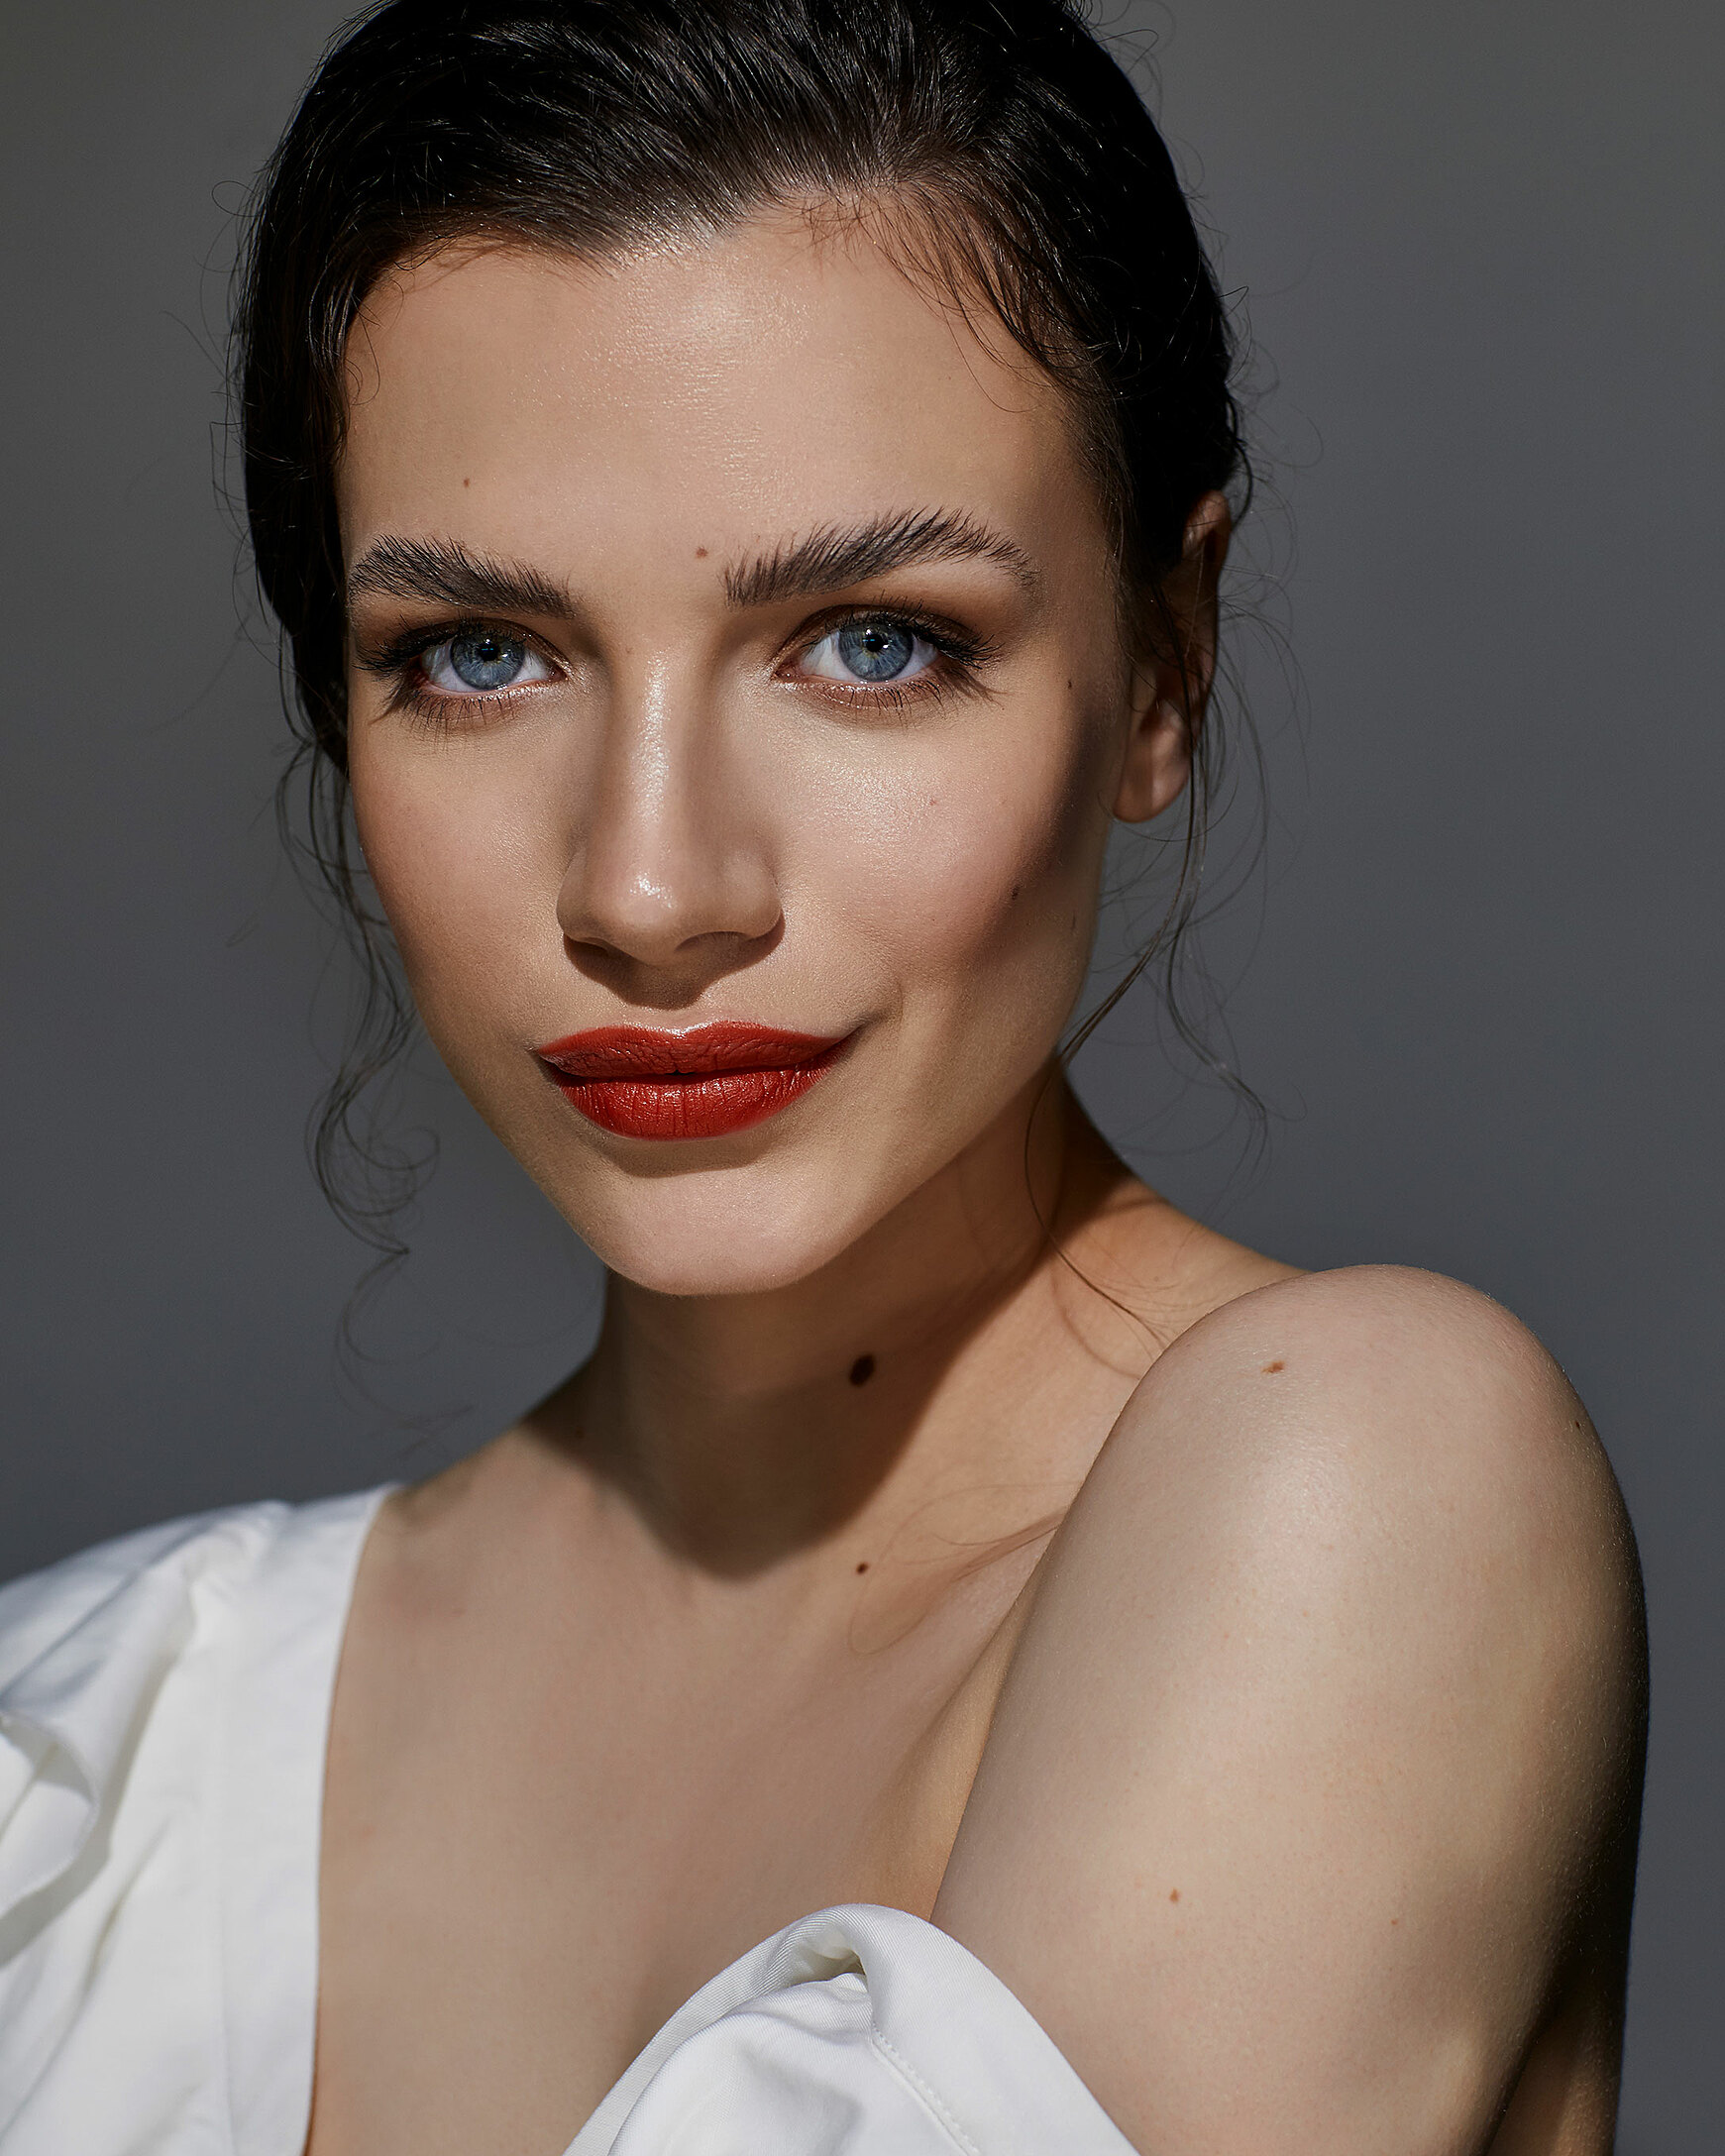 A beauty photography of a female model with dark hair. She wears a red lips and a white top